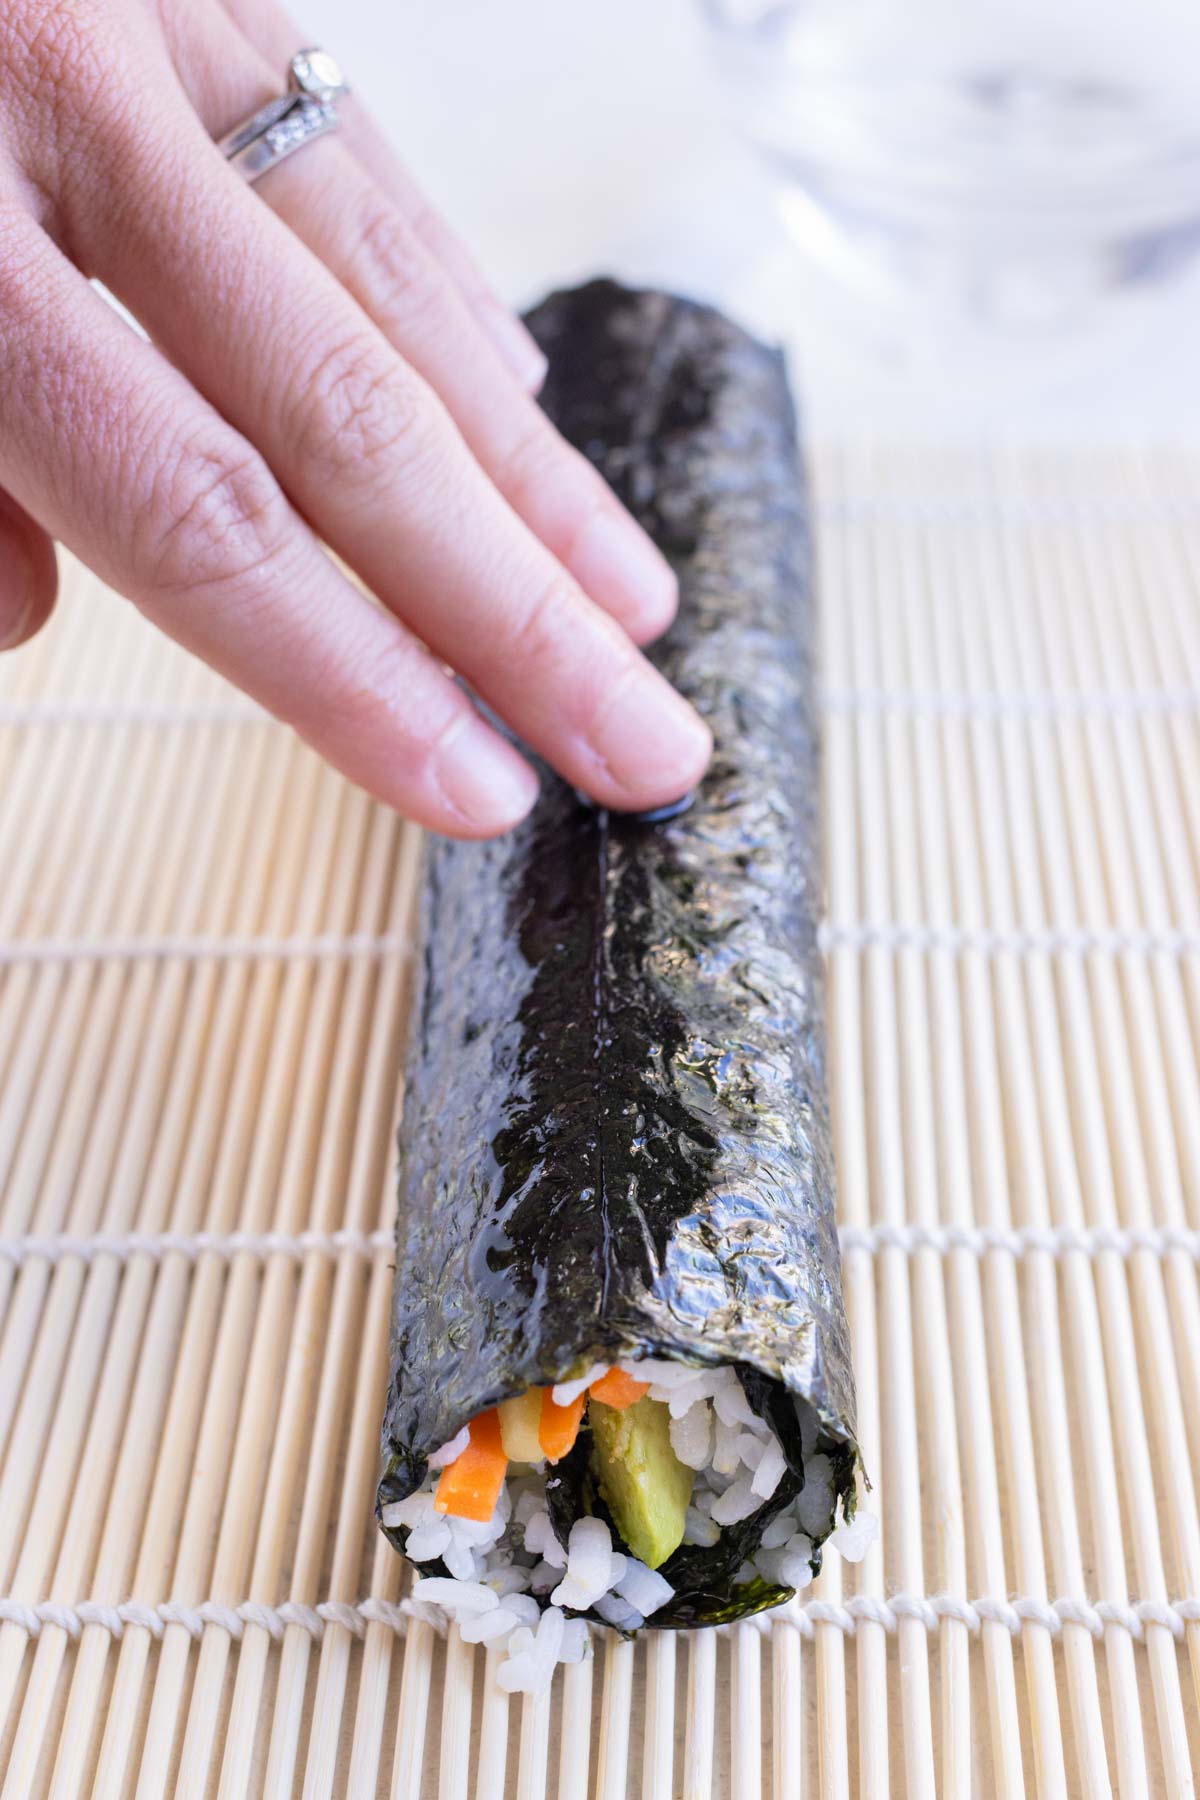 Water is used to seal the avocado roll.